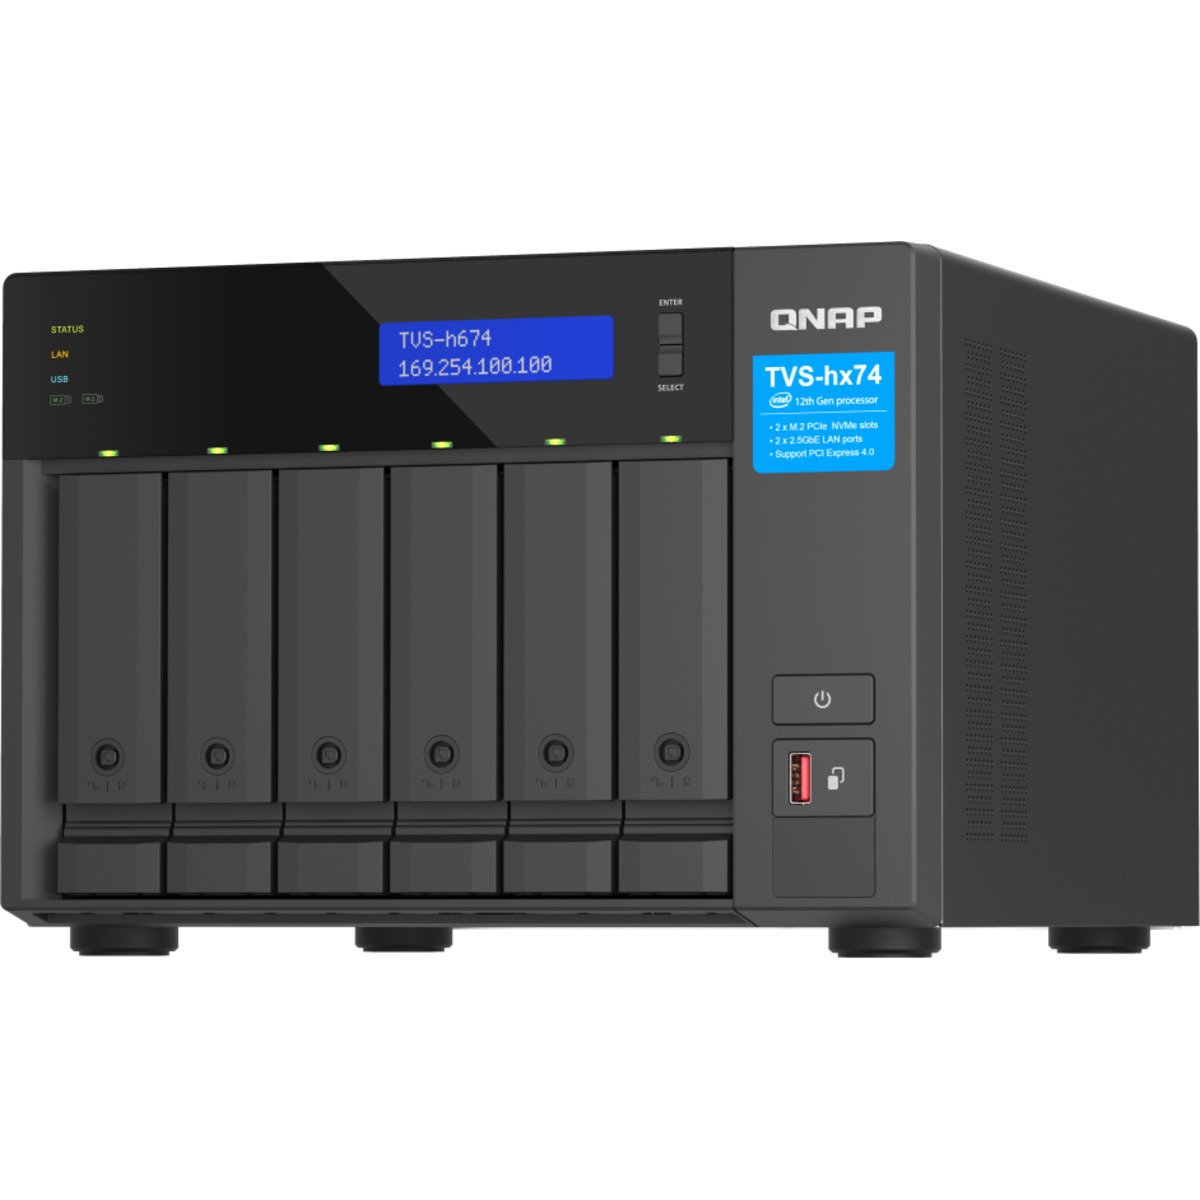 QNAP TVS-h674 Core i5 40tb 6-Bay Desktop Multimedia / Power User / Business NAS - Network Attached Storage Device 4x10tb Western Digital Gold WD102KRYZ 3.5 7200rpm SATA 6Gb/s HDD ENTERPRISE Class Drives Installed - Burn-In Tested TVS-h674 Core i5